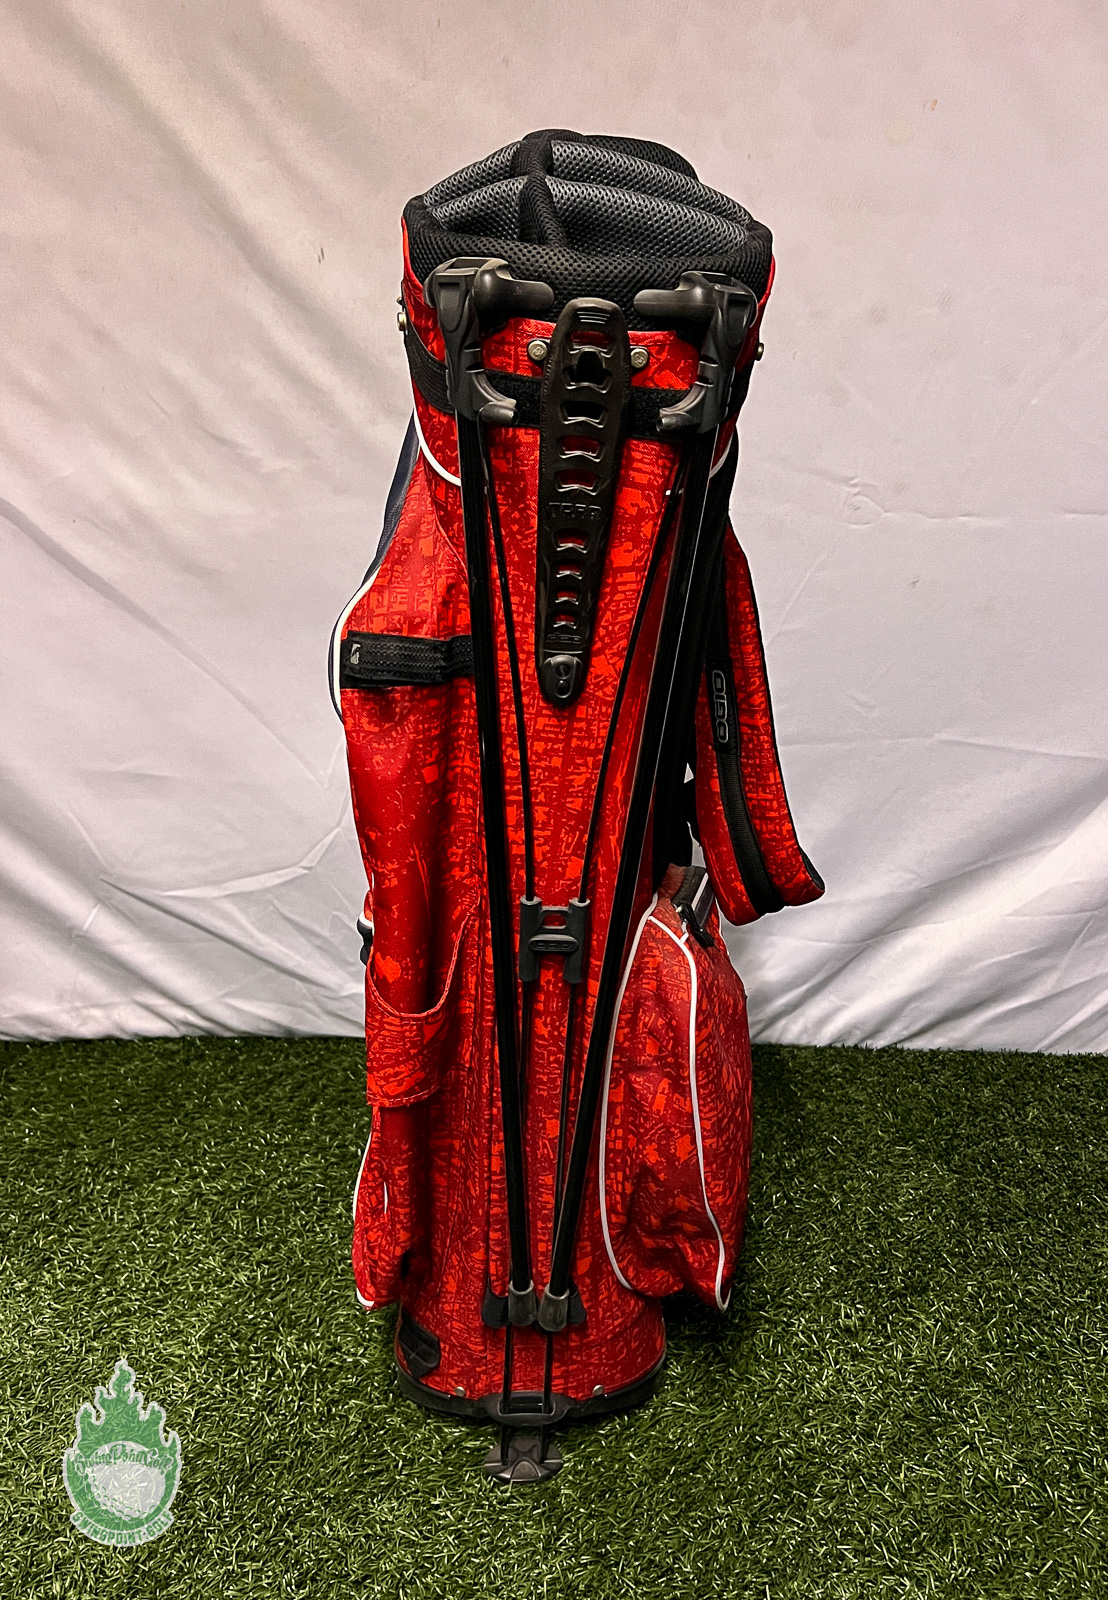 Used Ogio SHREDDER 8 WAY STAND BAG Golf Stand Bags Golf Stand Bags